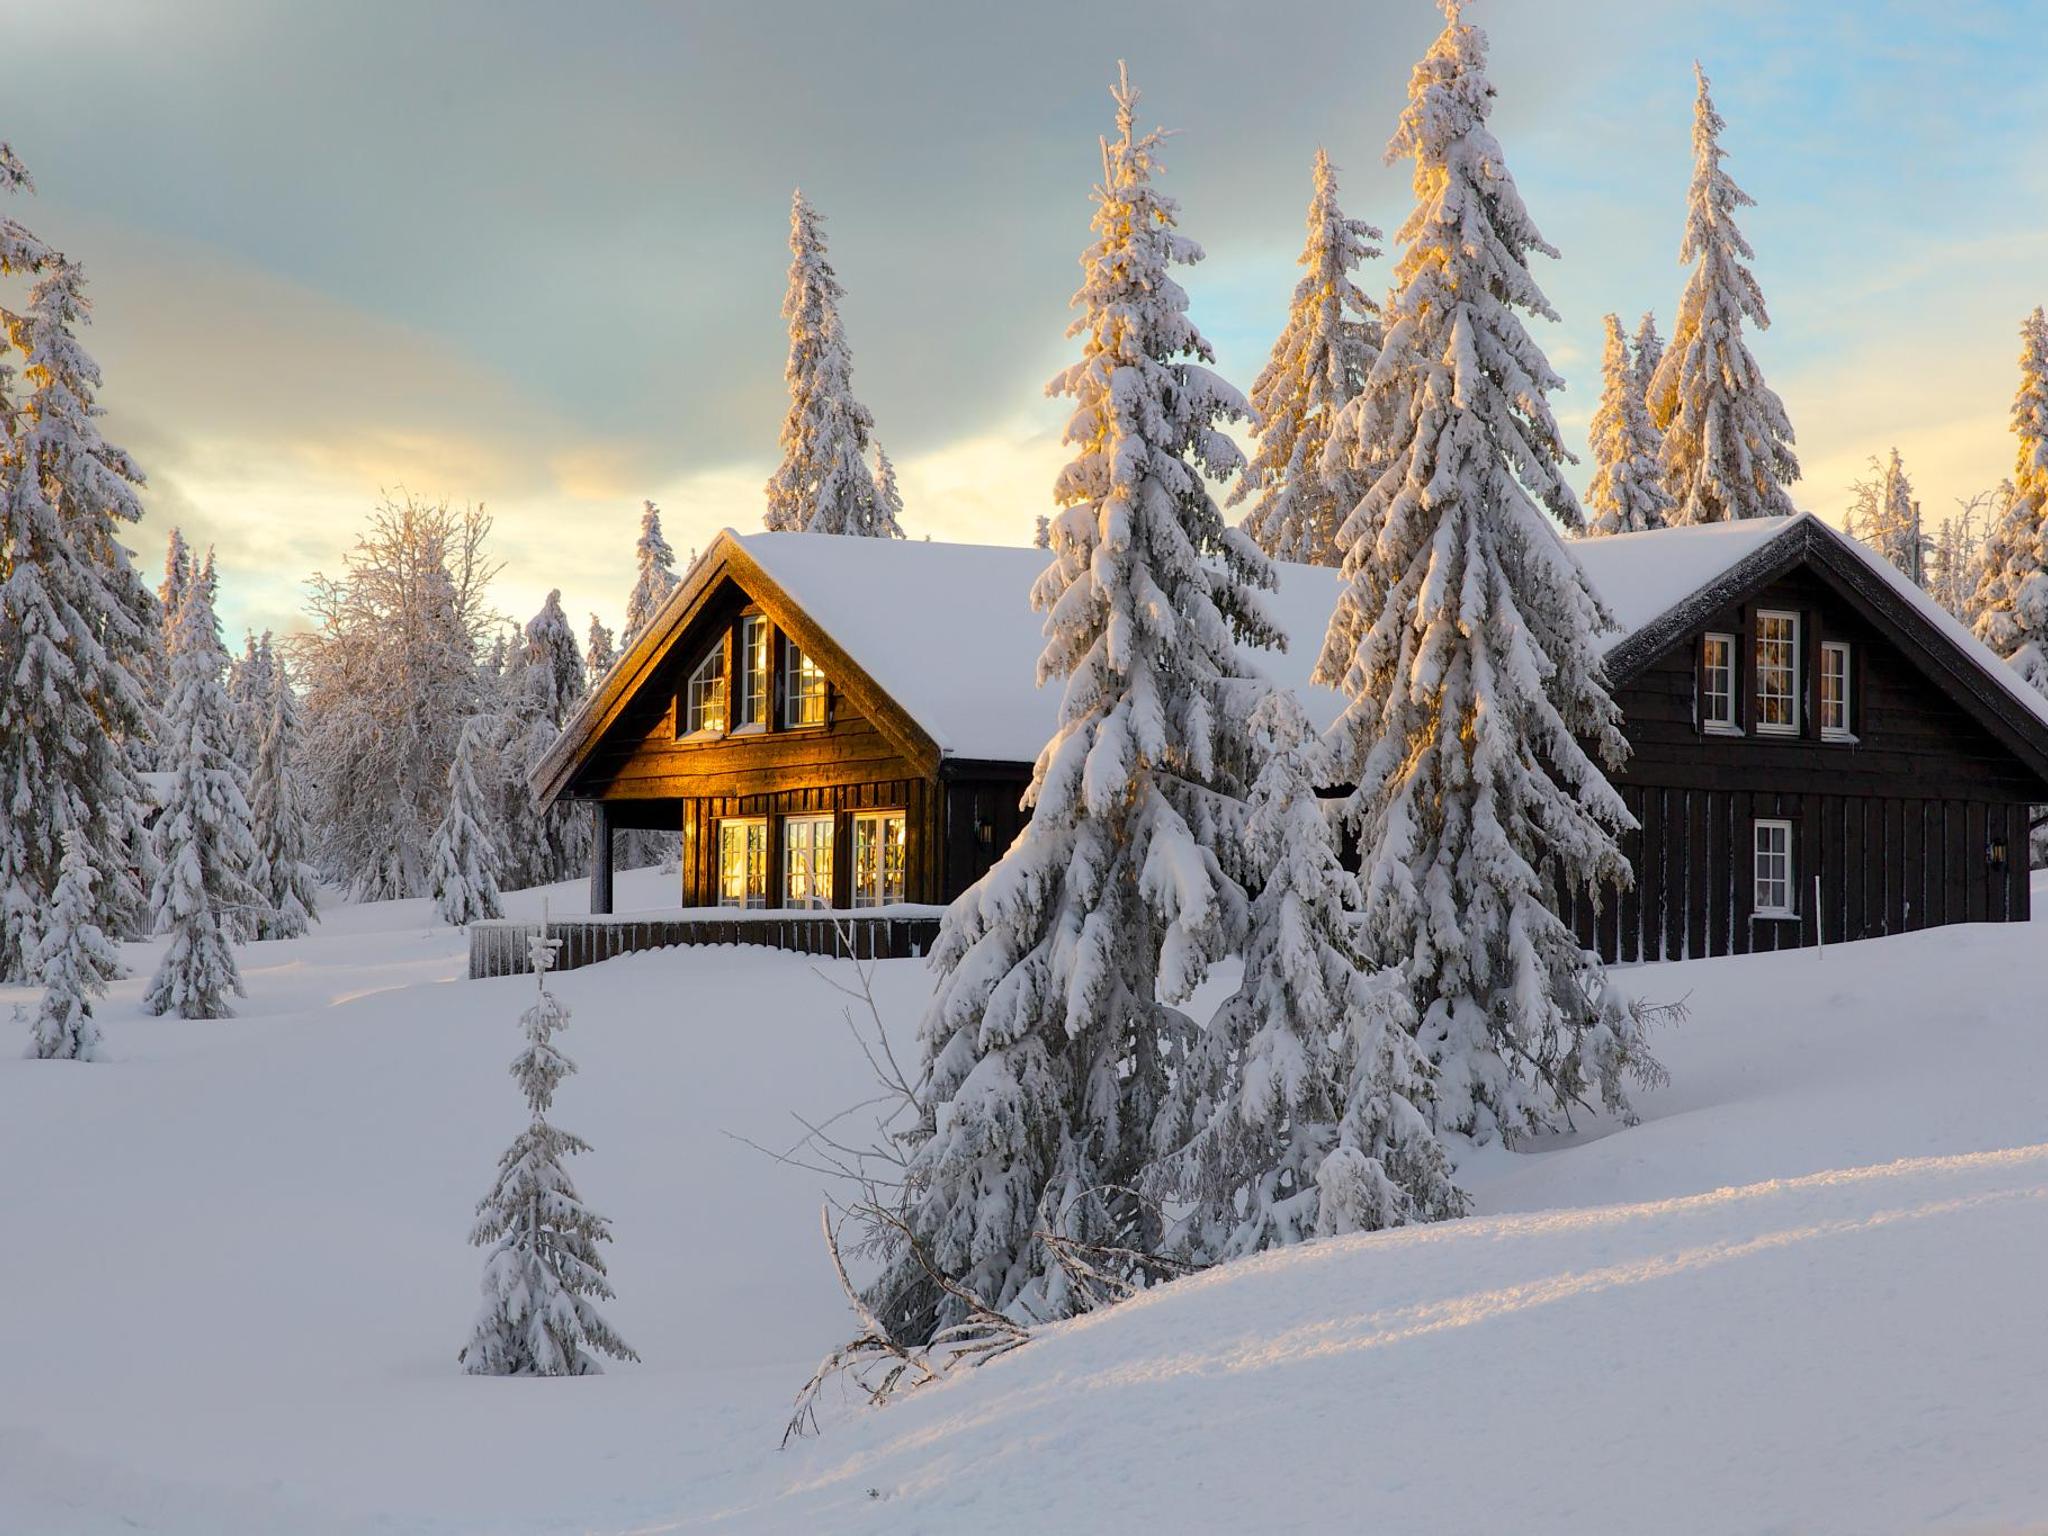 Snowy Winter Getaways for Bookers